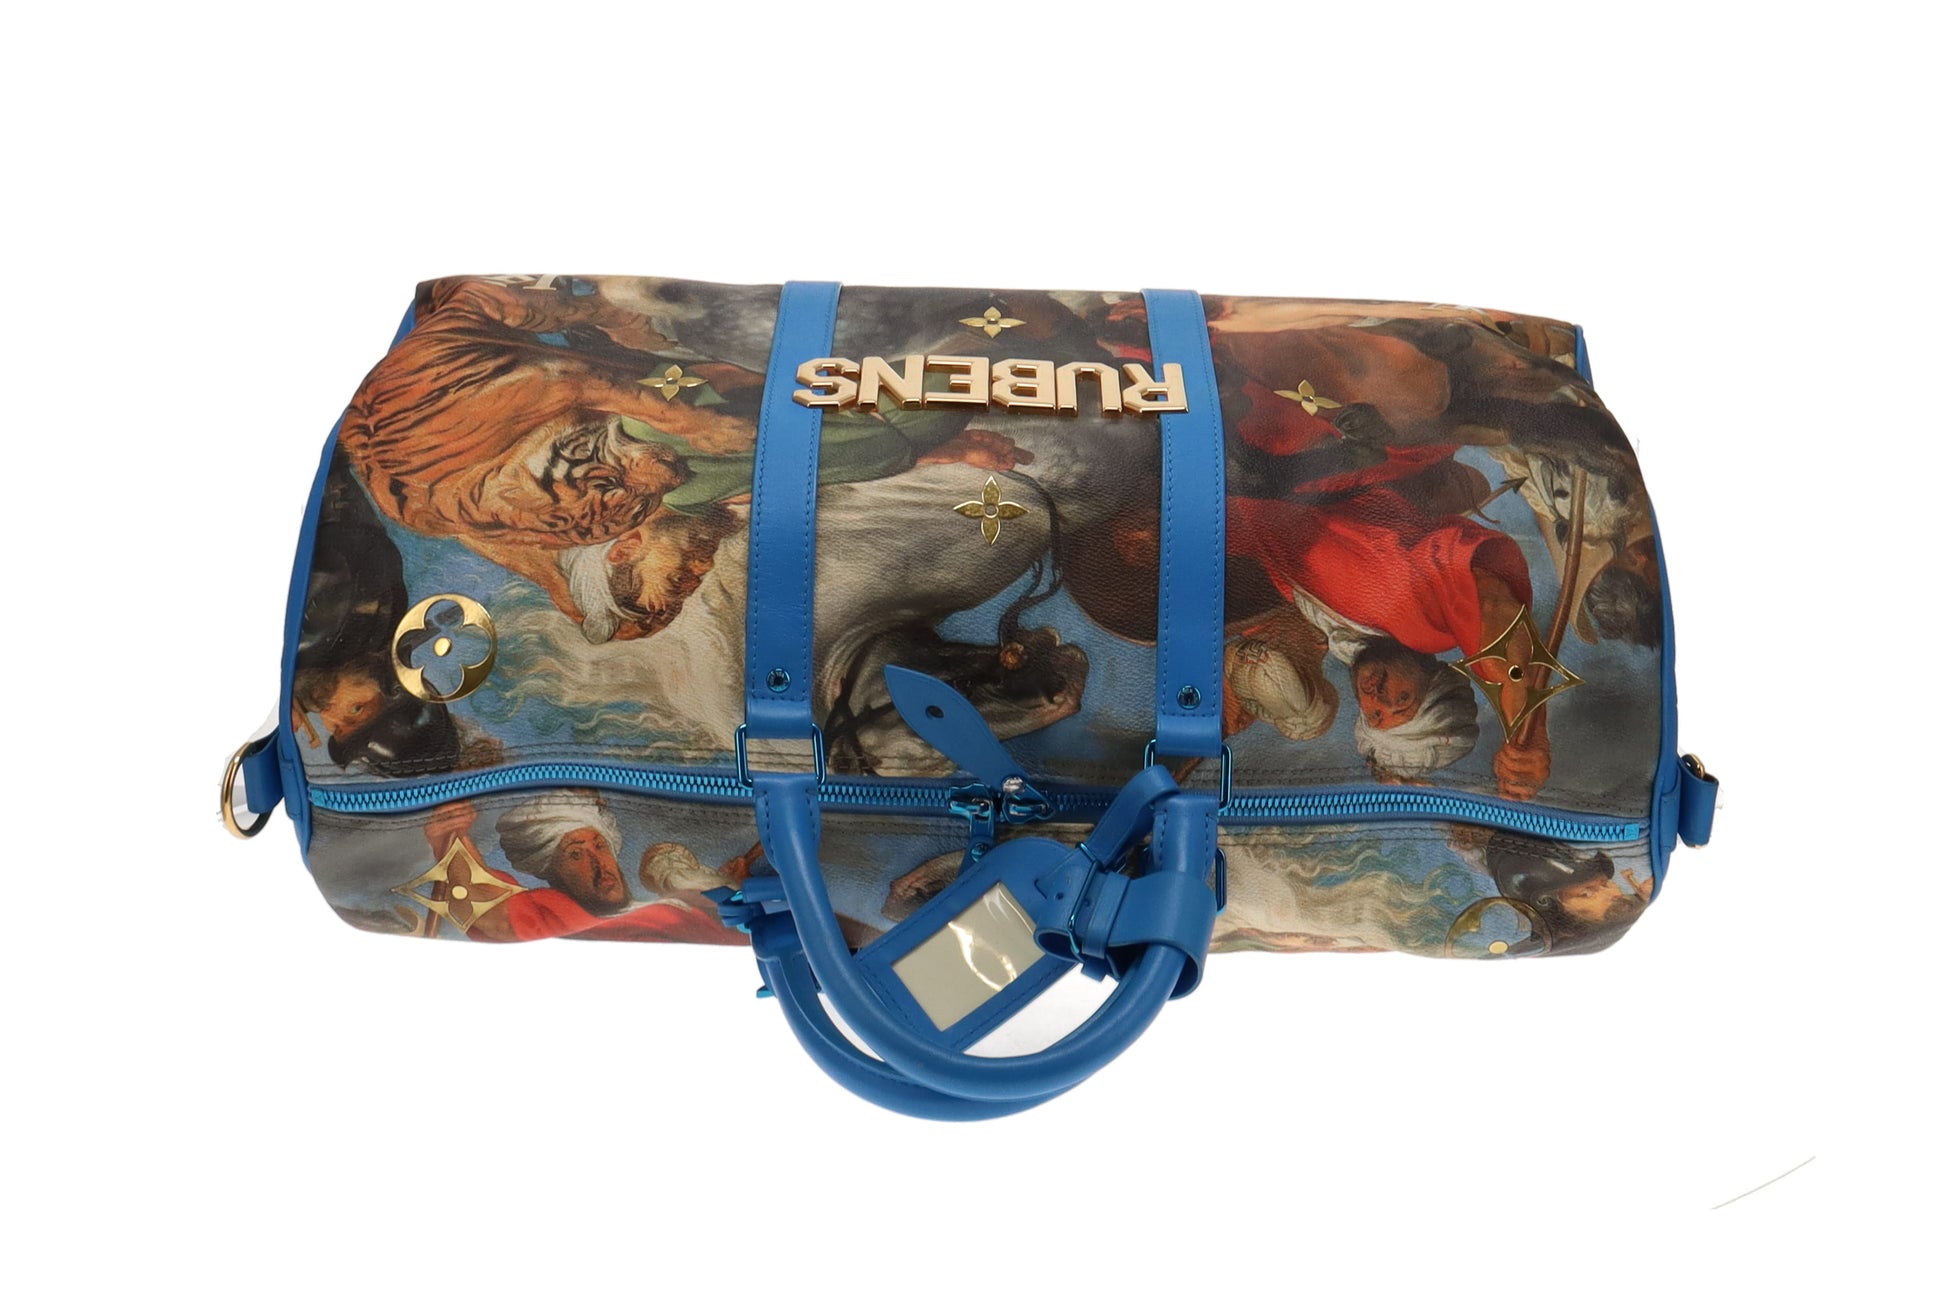 Louis Vuitton Masters - Rubens, “The Tiger Hunt” (c. 1615) by Peter Paul  Rubens for the new collaboration between Louis Vuitton and Jeff Koons.  Available exclusively in Louis Vuitton, By Louis Vuitton